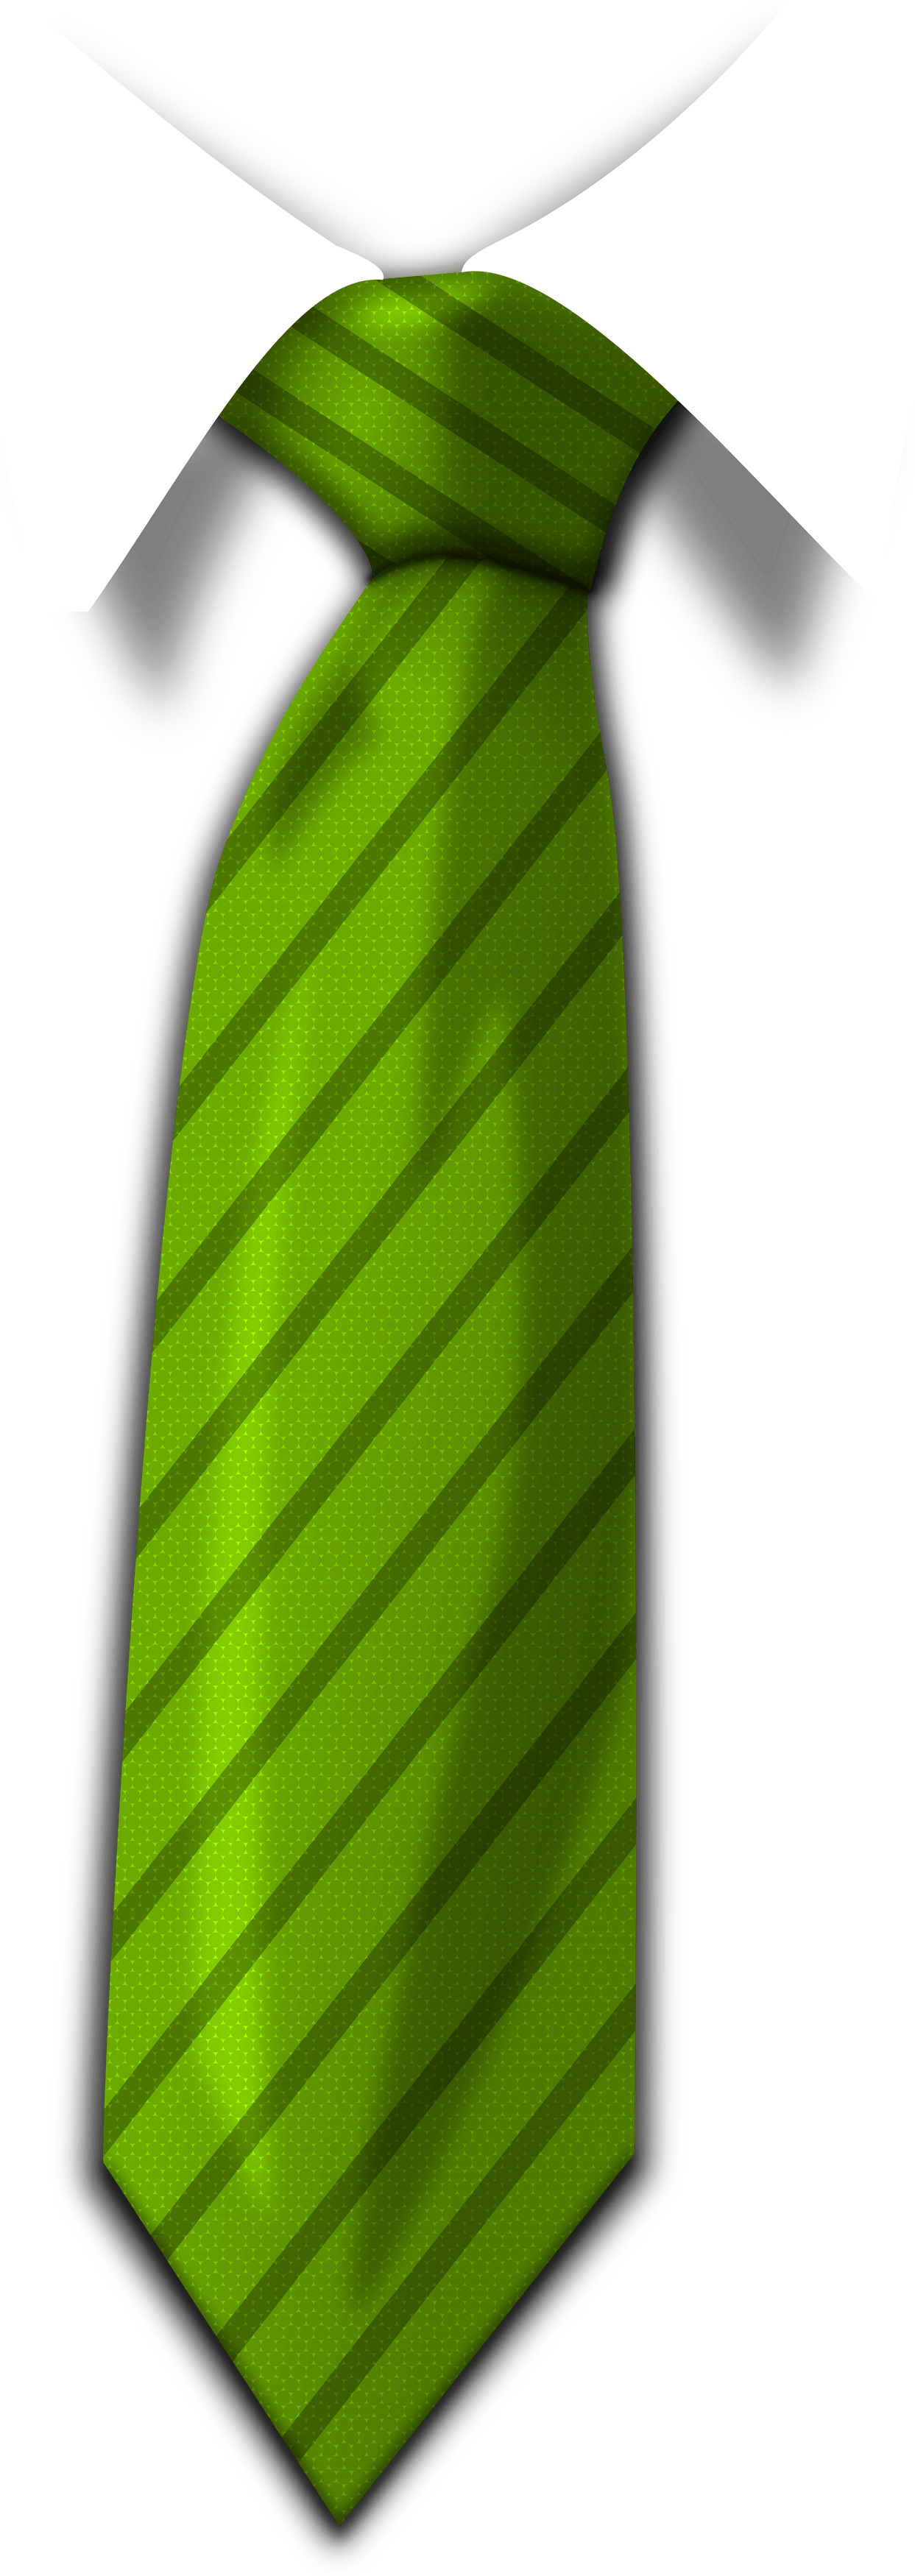 Green Tie Png Image PNG Image